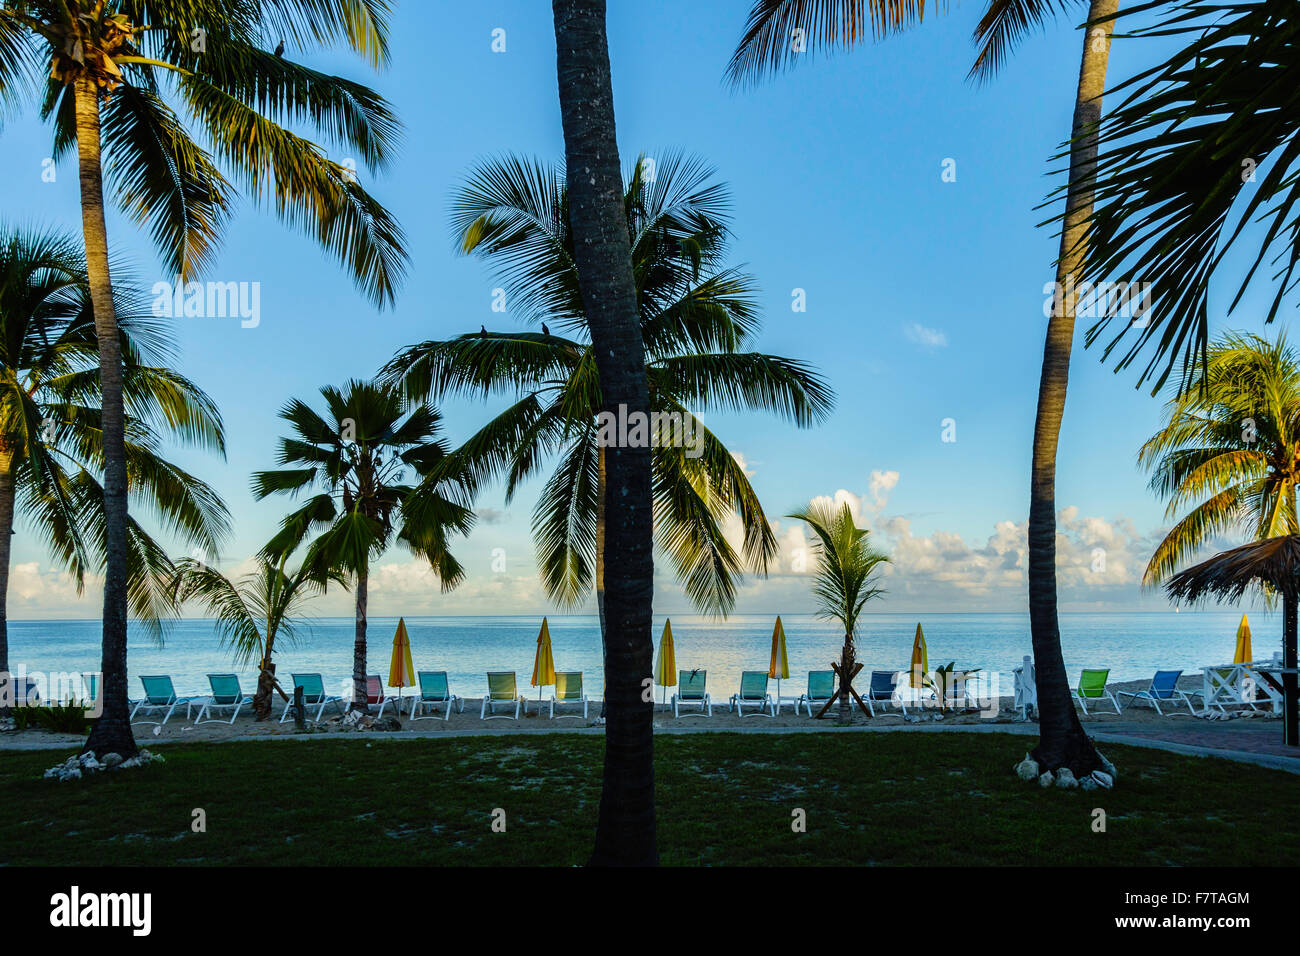 A view of the palm-lined beach and Caribbean sea during the evening from a resort on St. Croix, U.S. Virgin Islands. USVI, U.S.V.I. Stock Photo